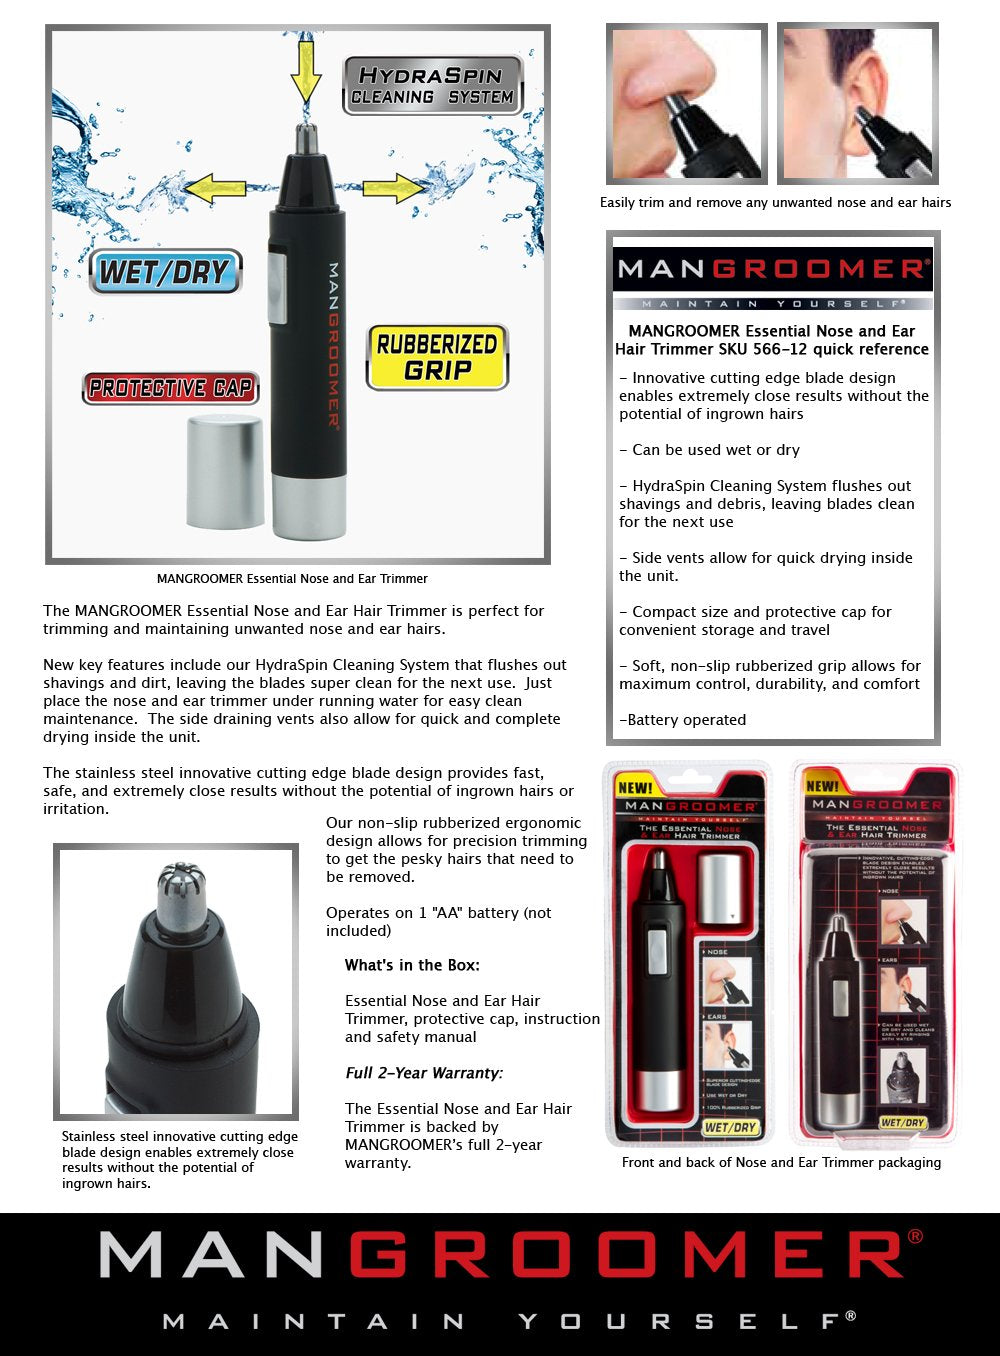 MANGROOMER PRO Essential Nose and Ear Hair Trimmer